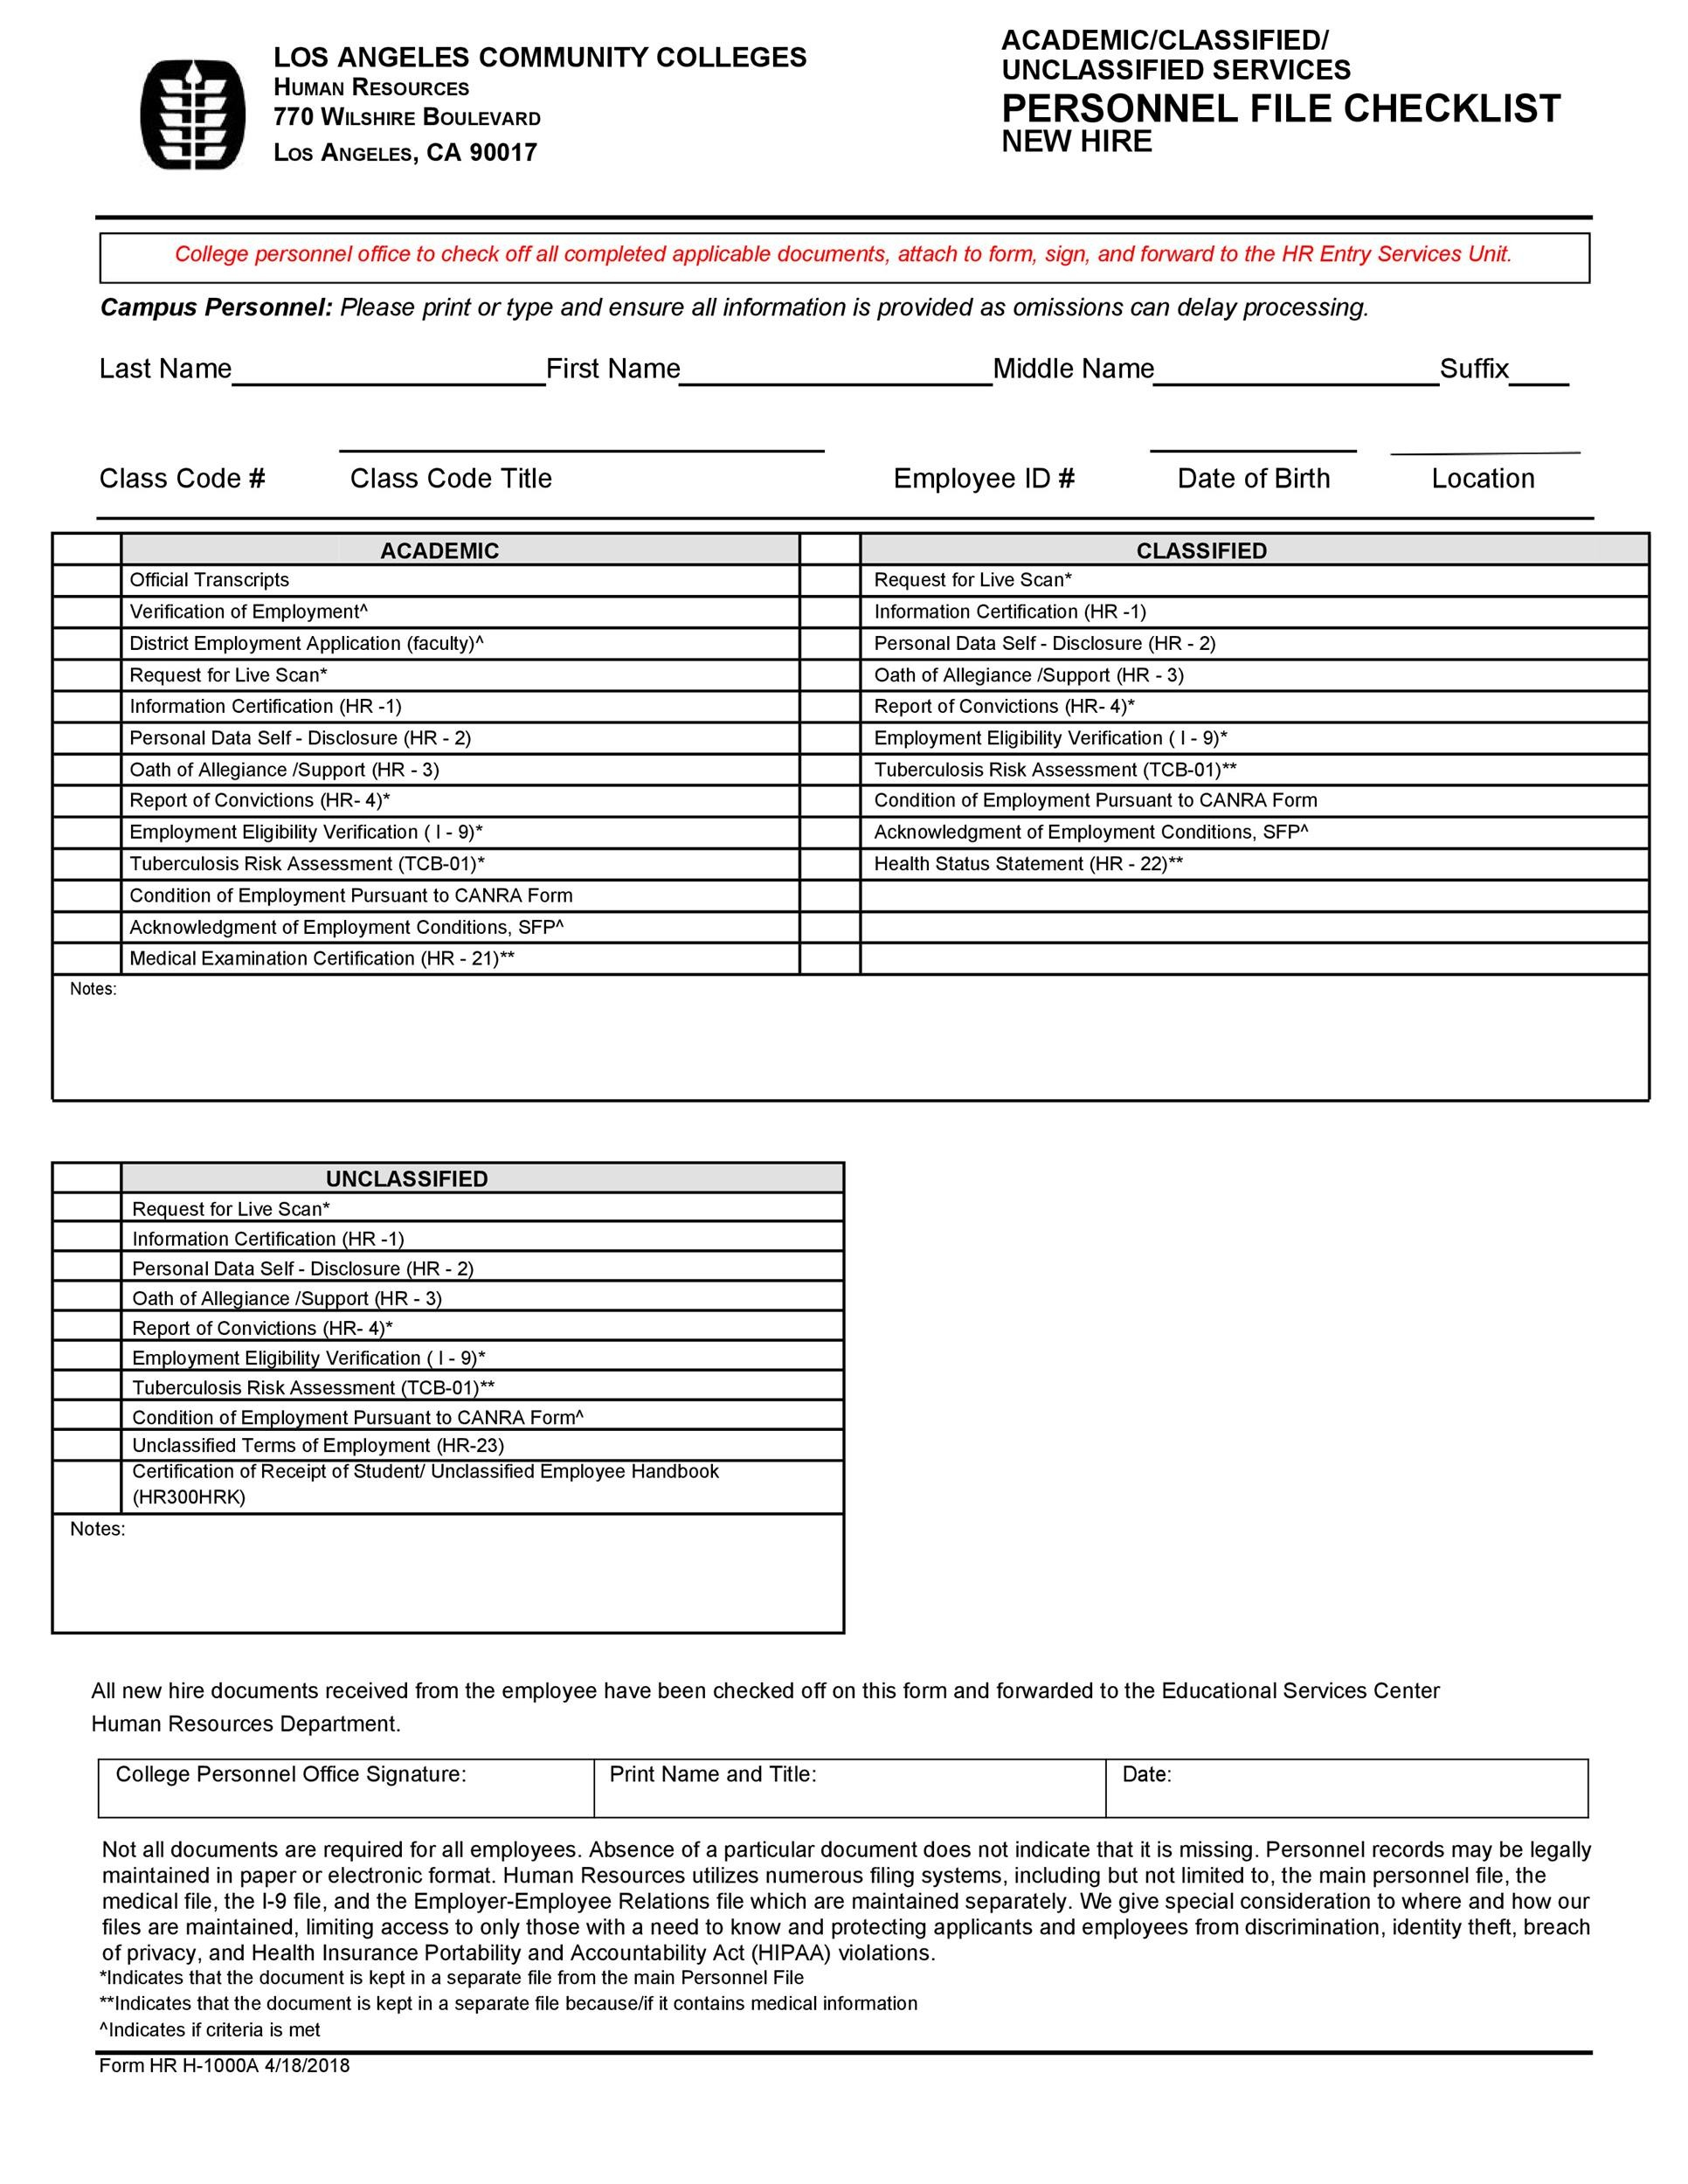 10 Useful New Hire Checklist Templates & Forms ᐅ TemplateLab In Employee Personnel File Checklist Template In Employee Personnel File Checklist Template